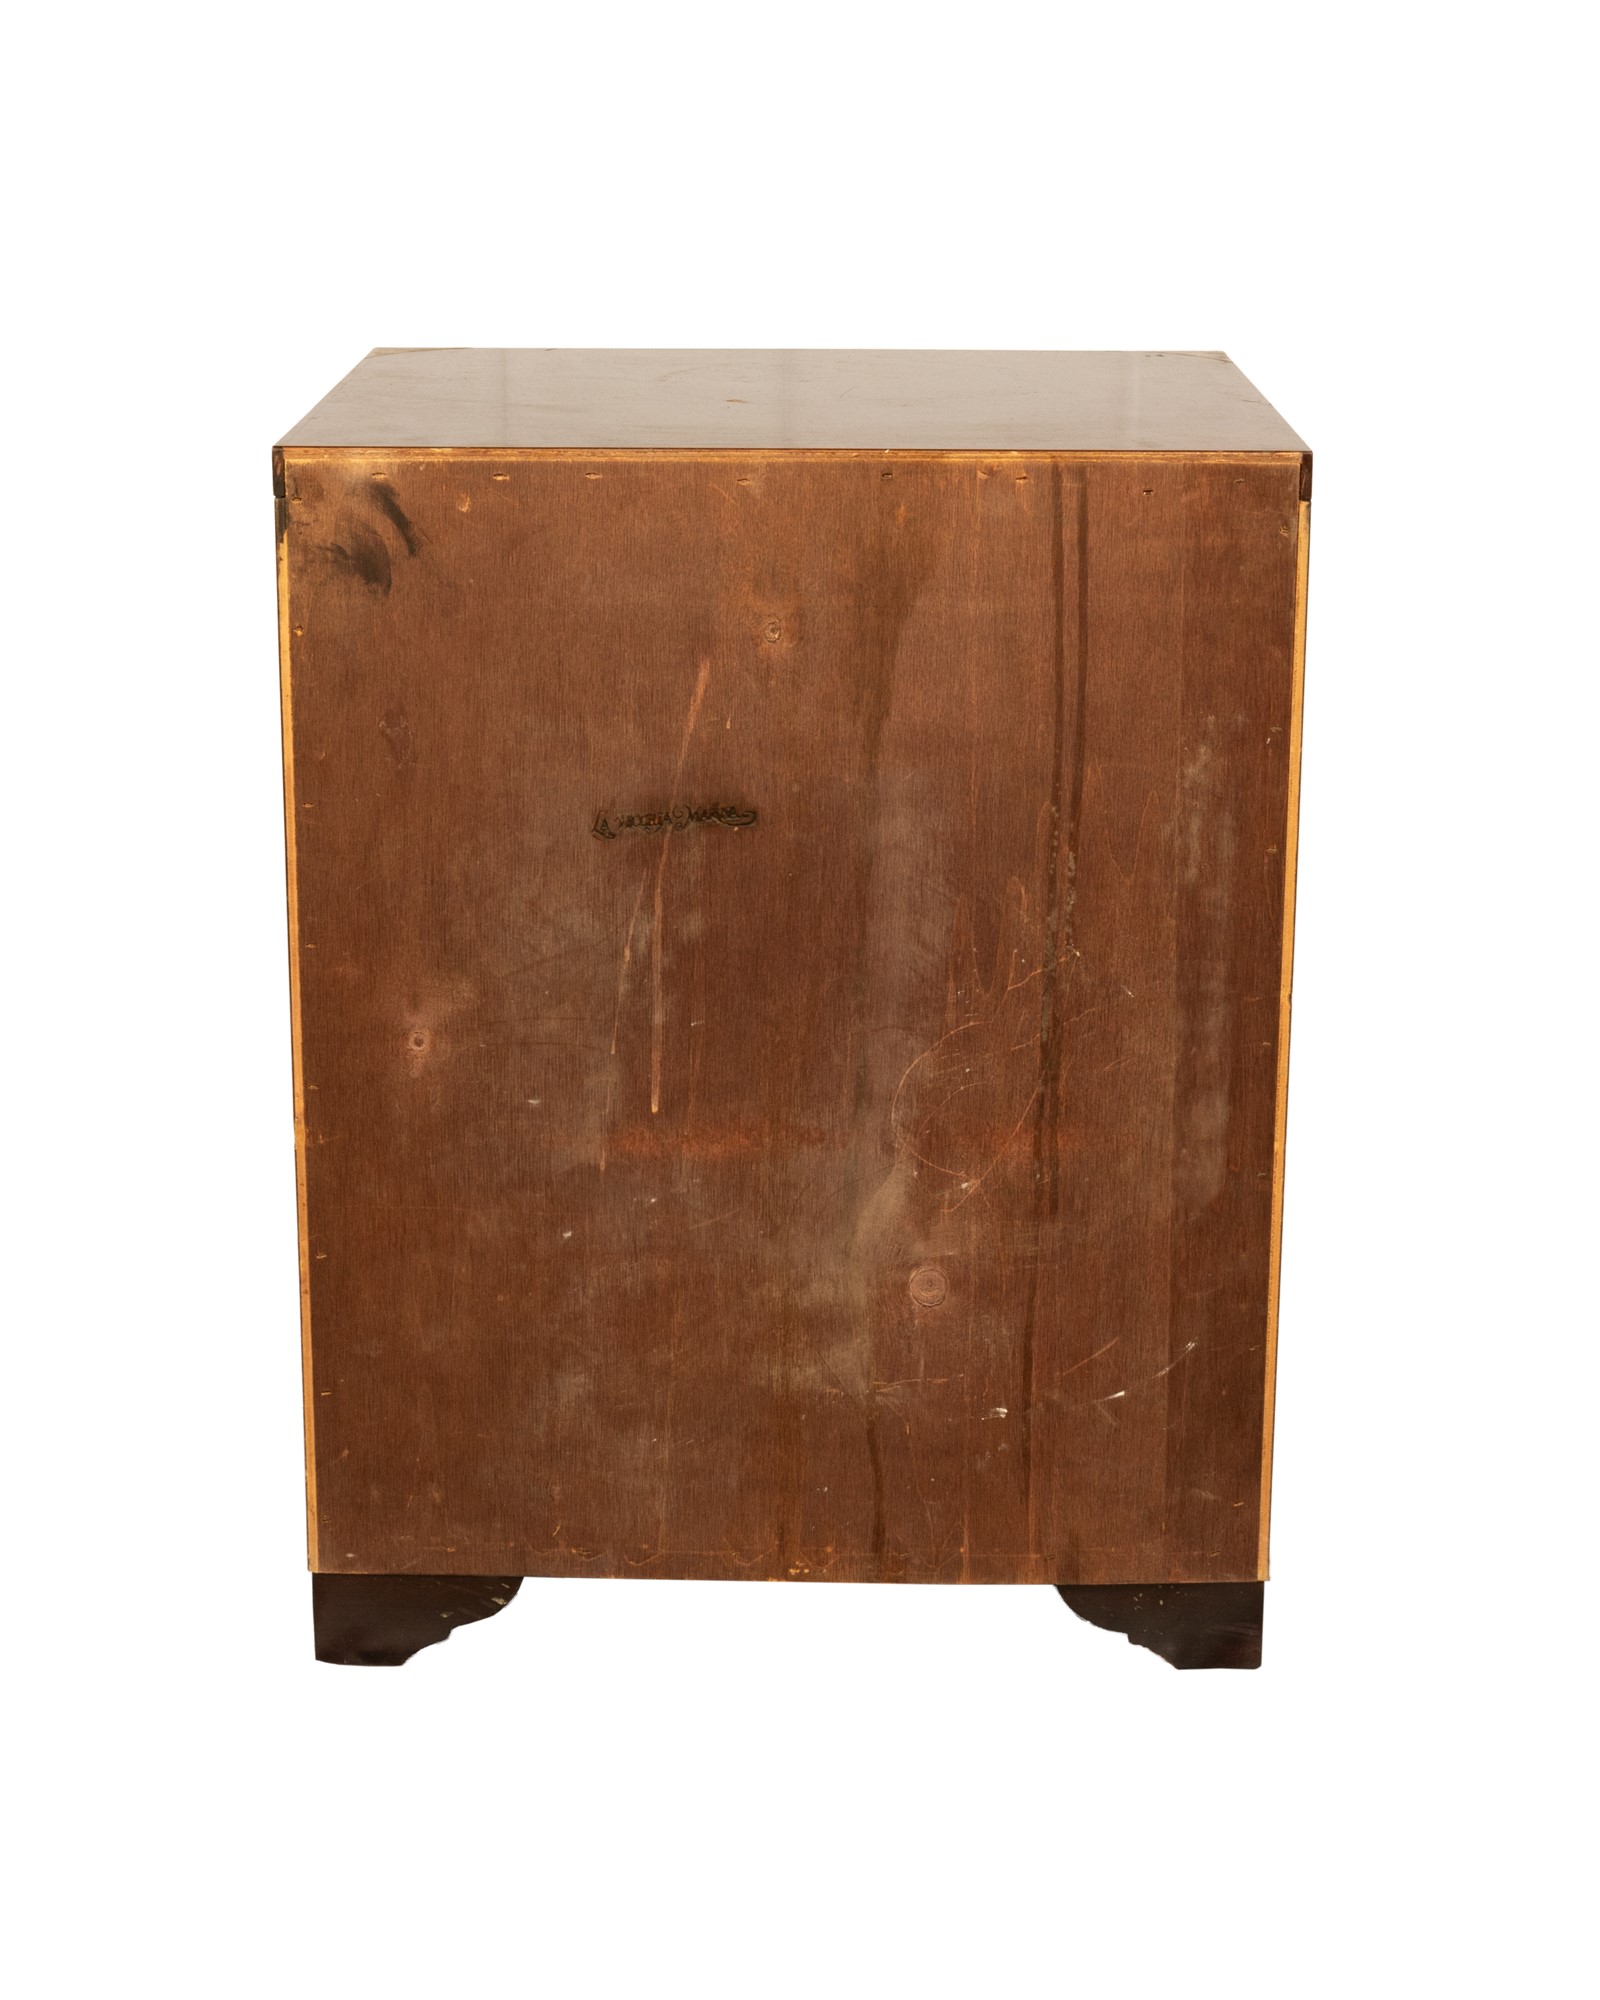 Antica Marina wooden bedside table with brass inserts - Image 22 of 23